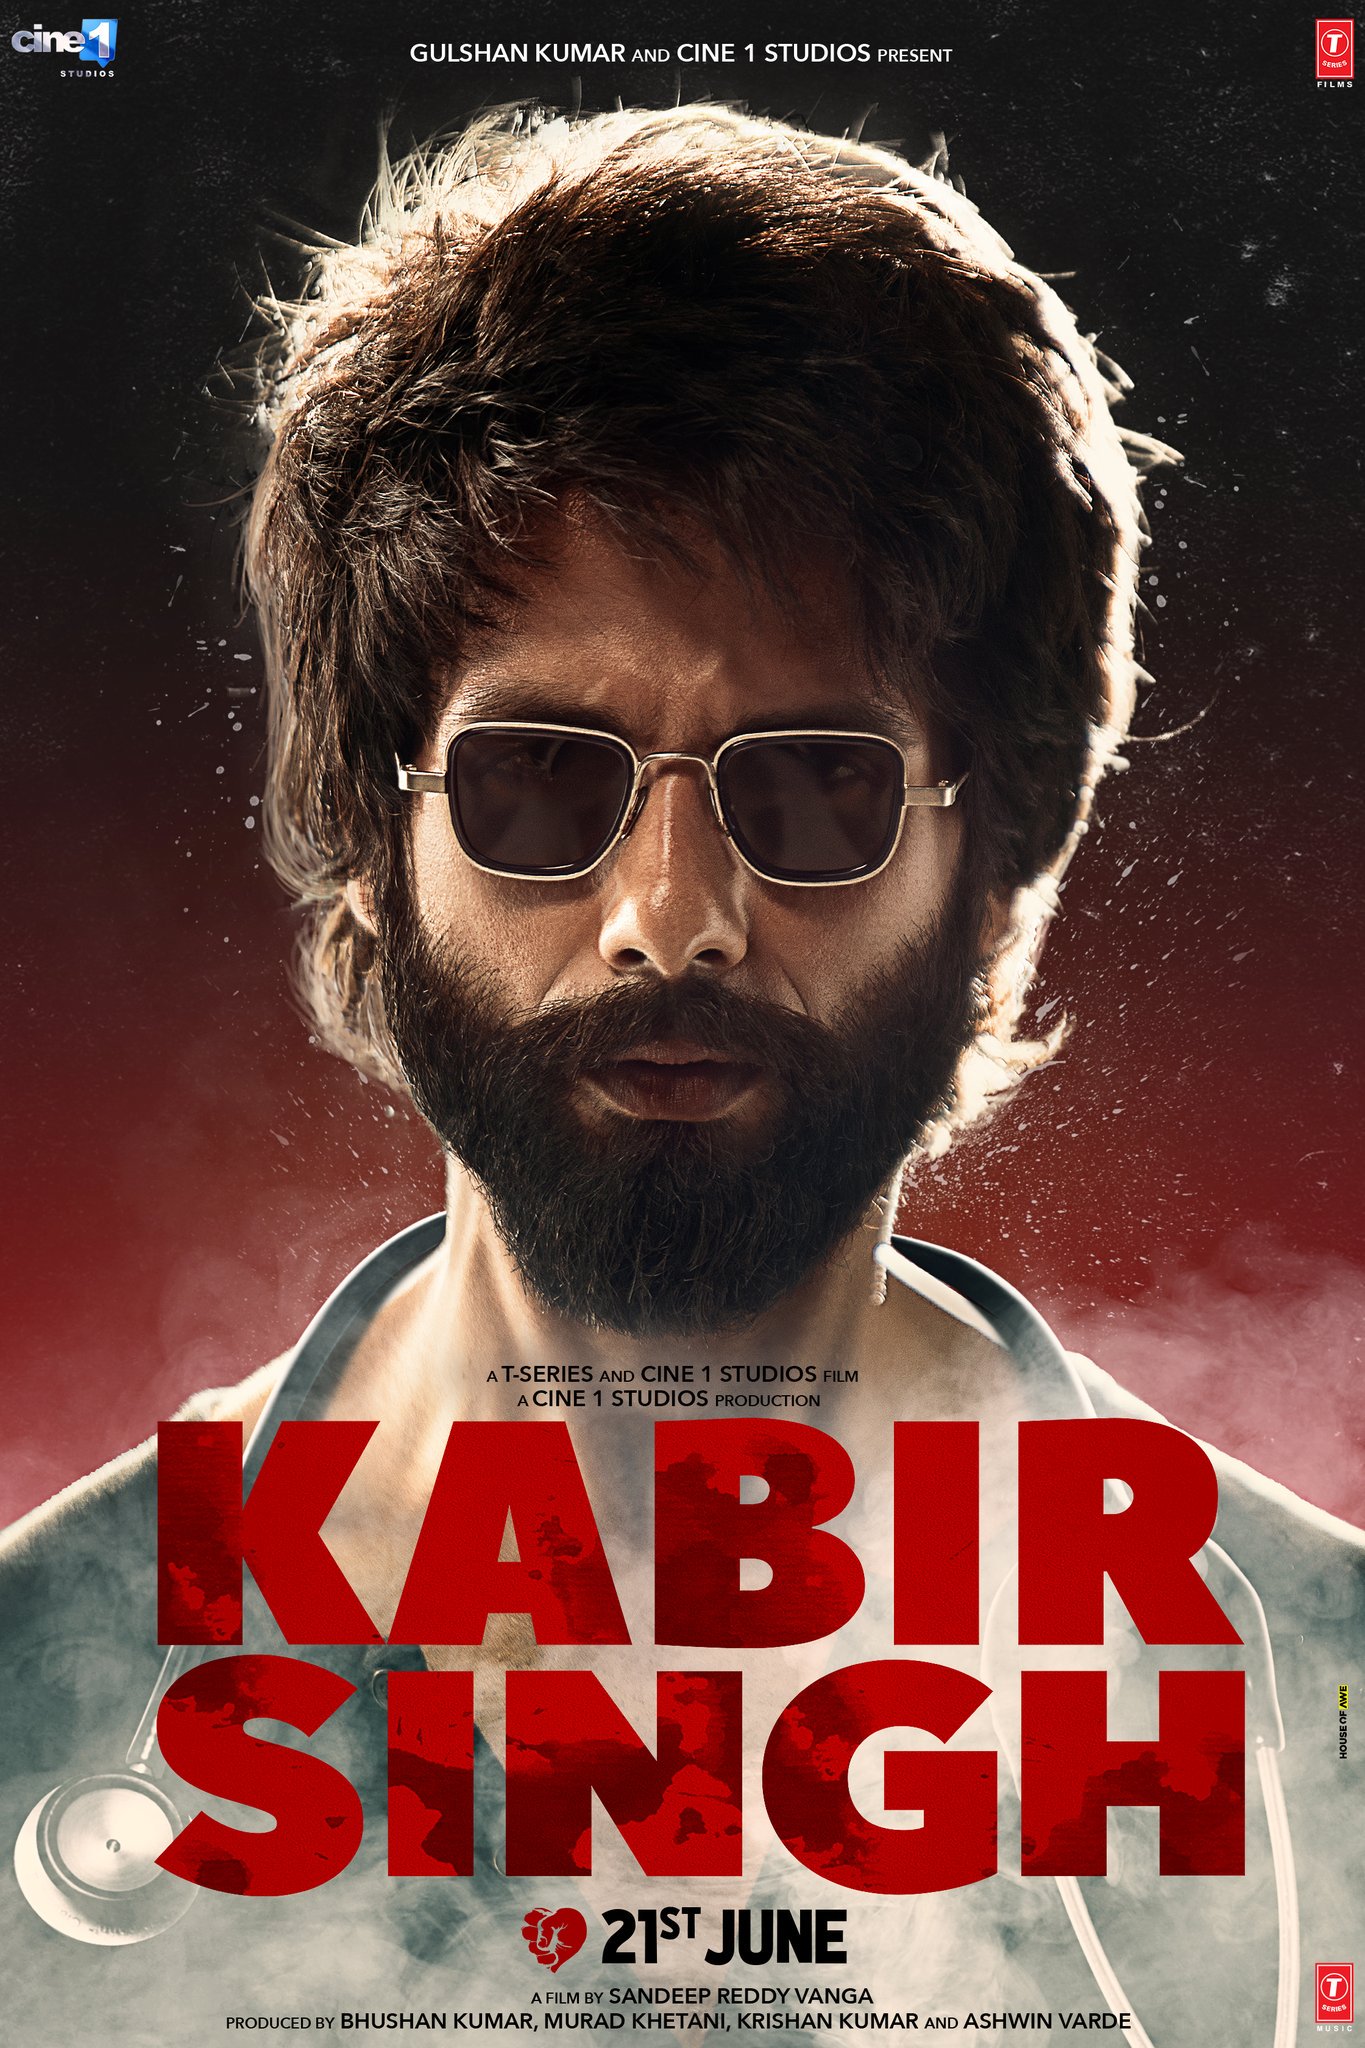 Kabir Singh Mid Movie Review: Shahid Kapoor impresses with his compelling performance